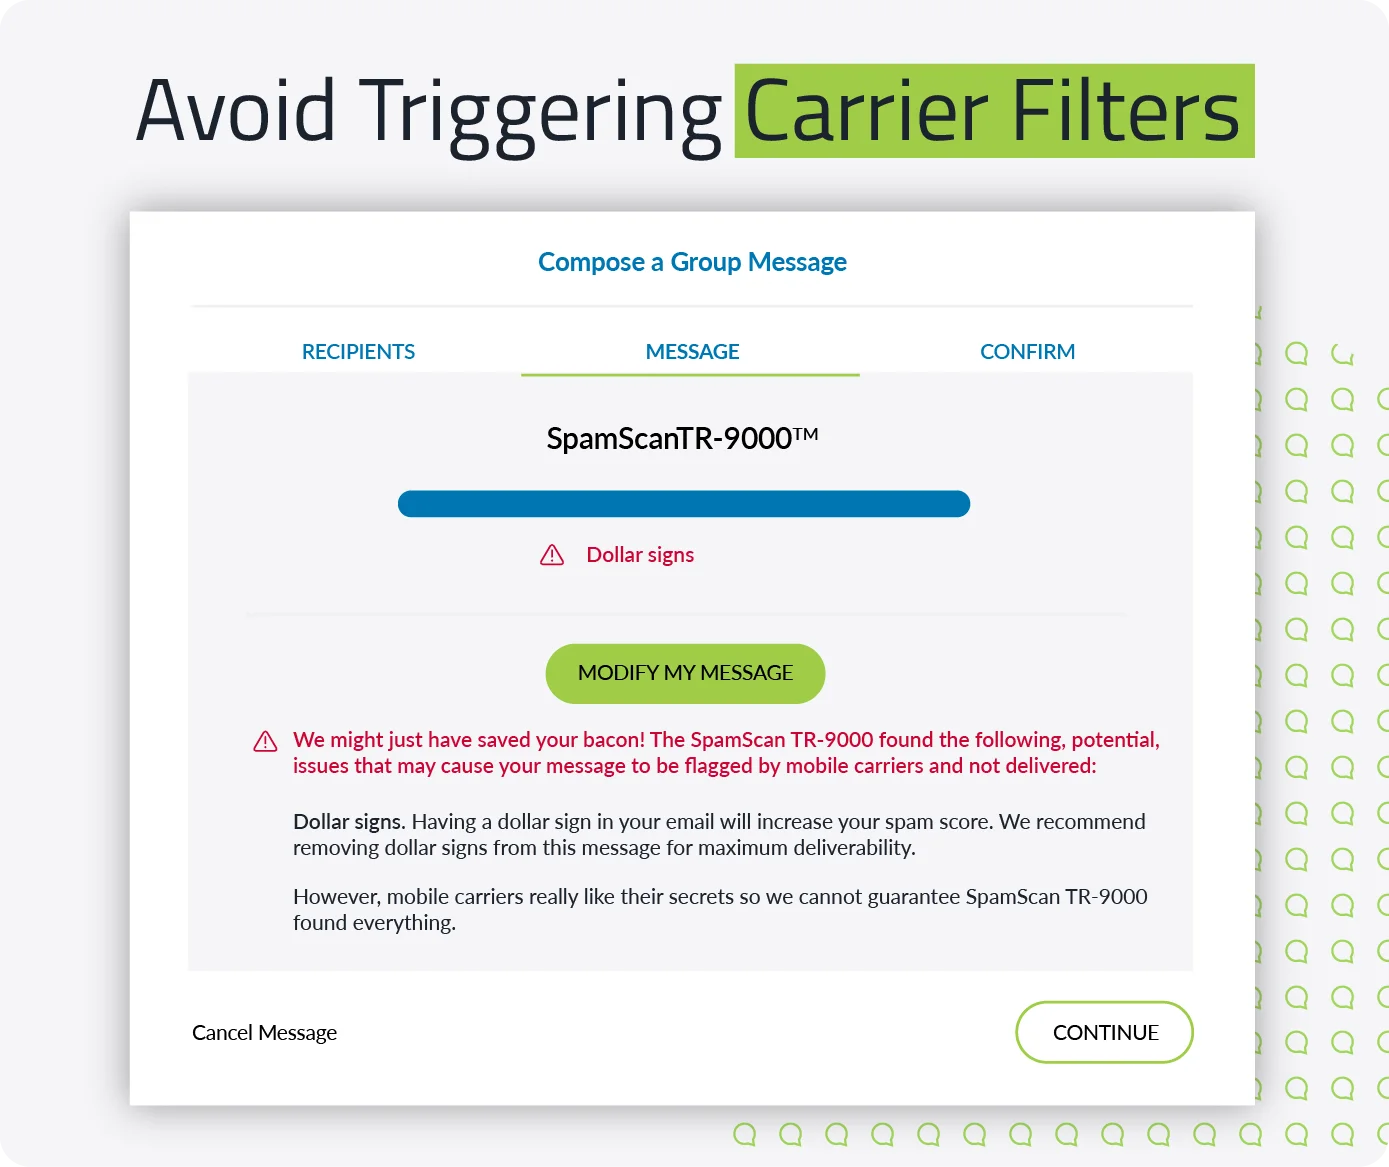 avoid-triggering-carrier-filters-with-text-request-spam-scanner